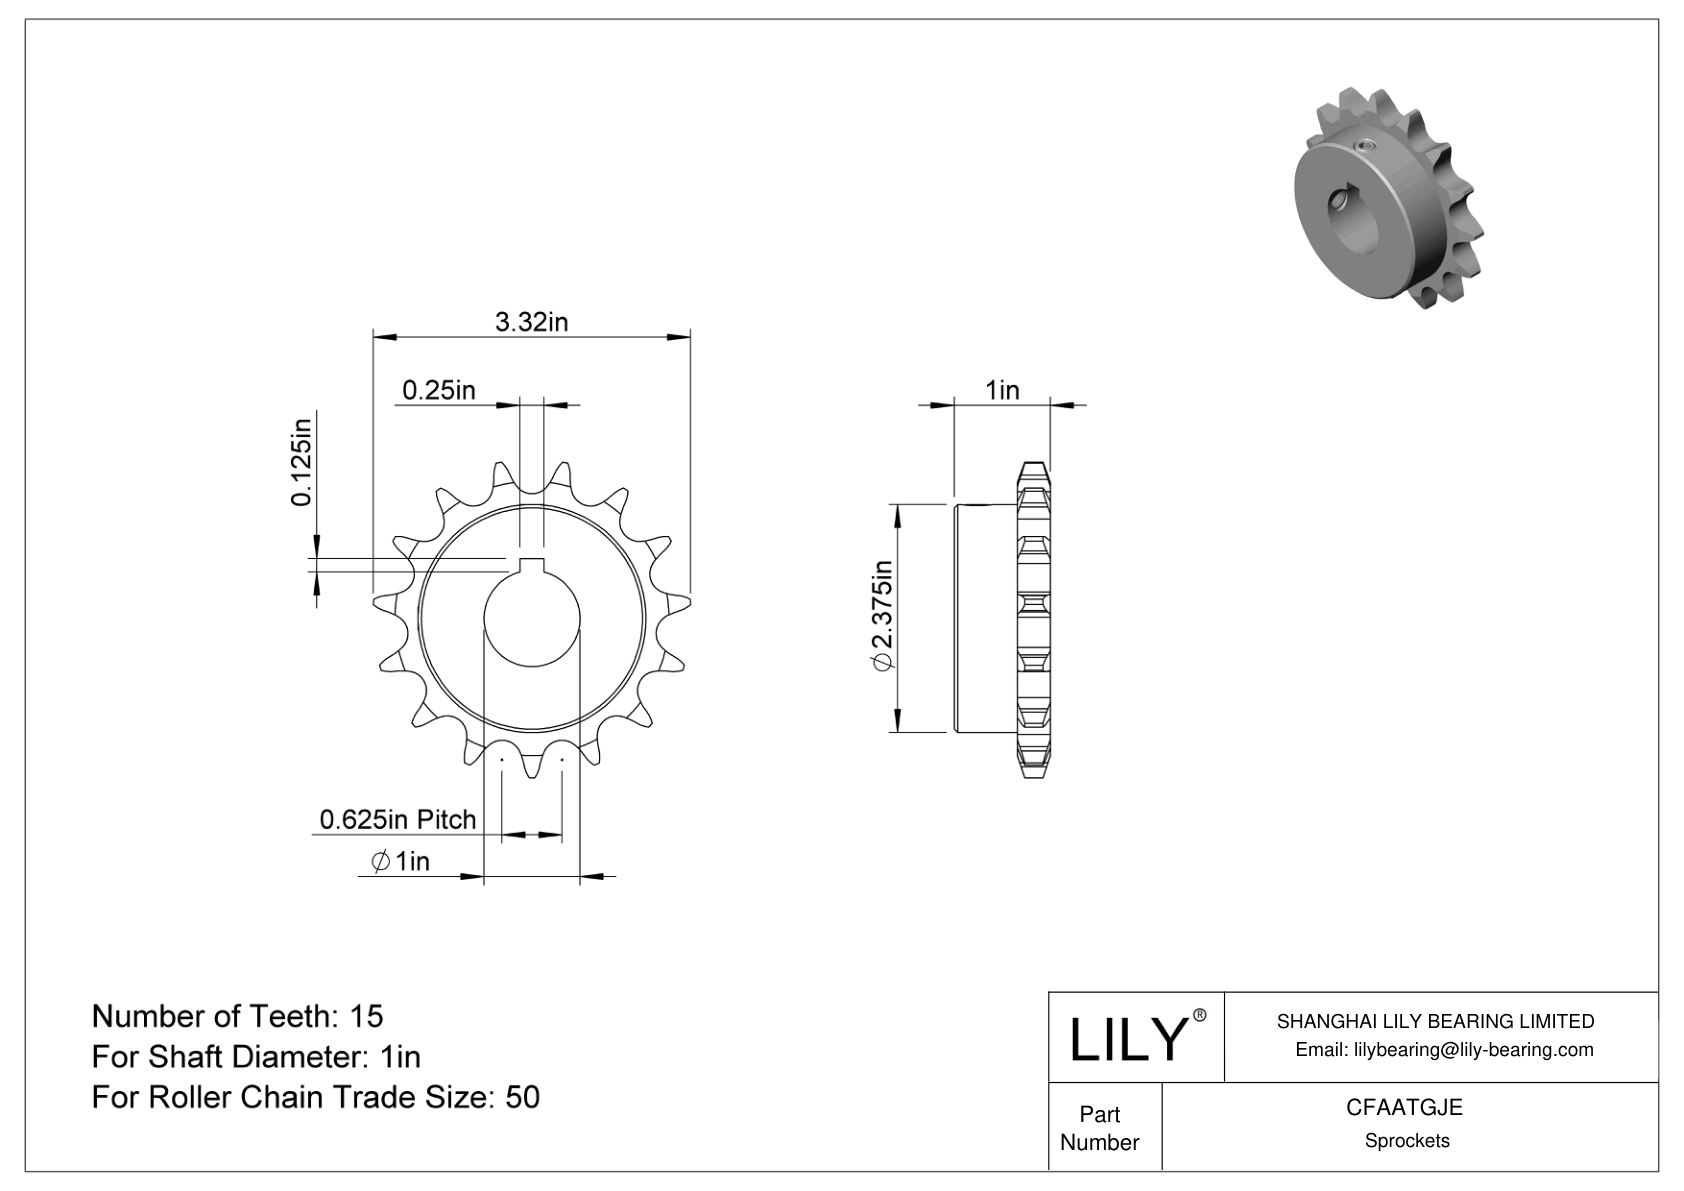 CFAATGJE Wear-Resistant Sprockets for ANSI Roller Chain cad drawing